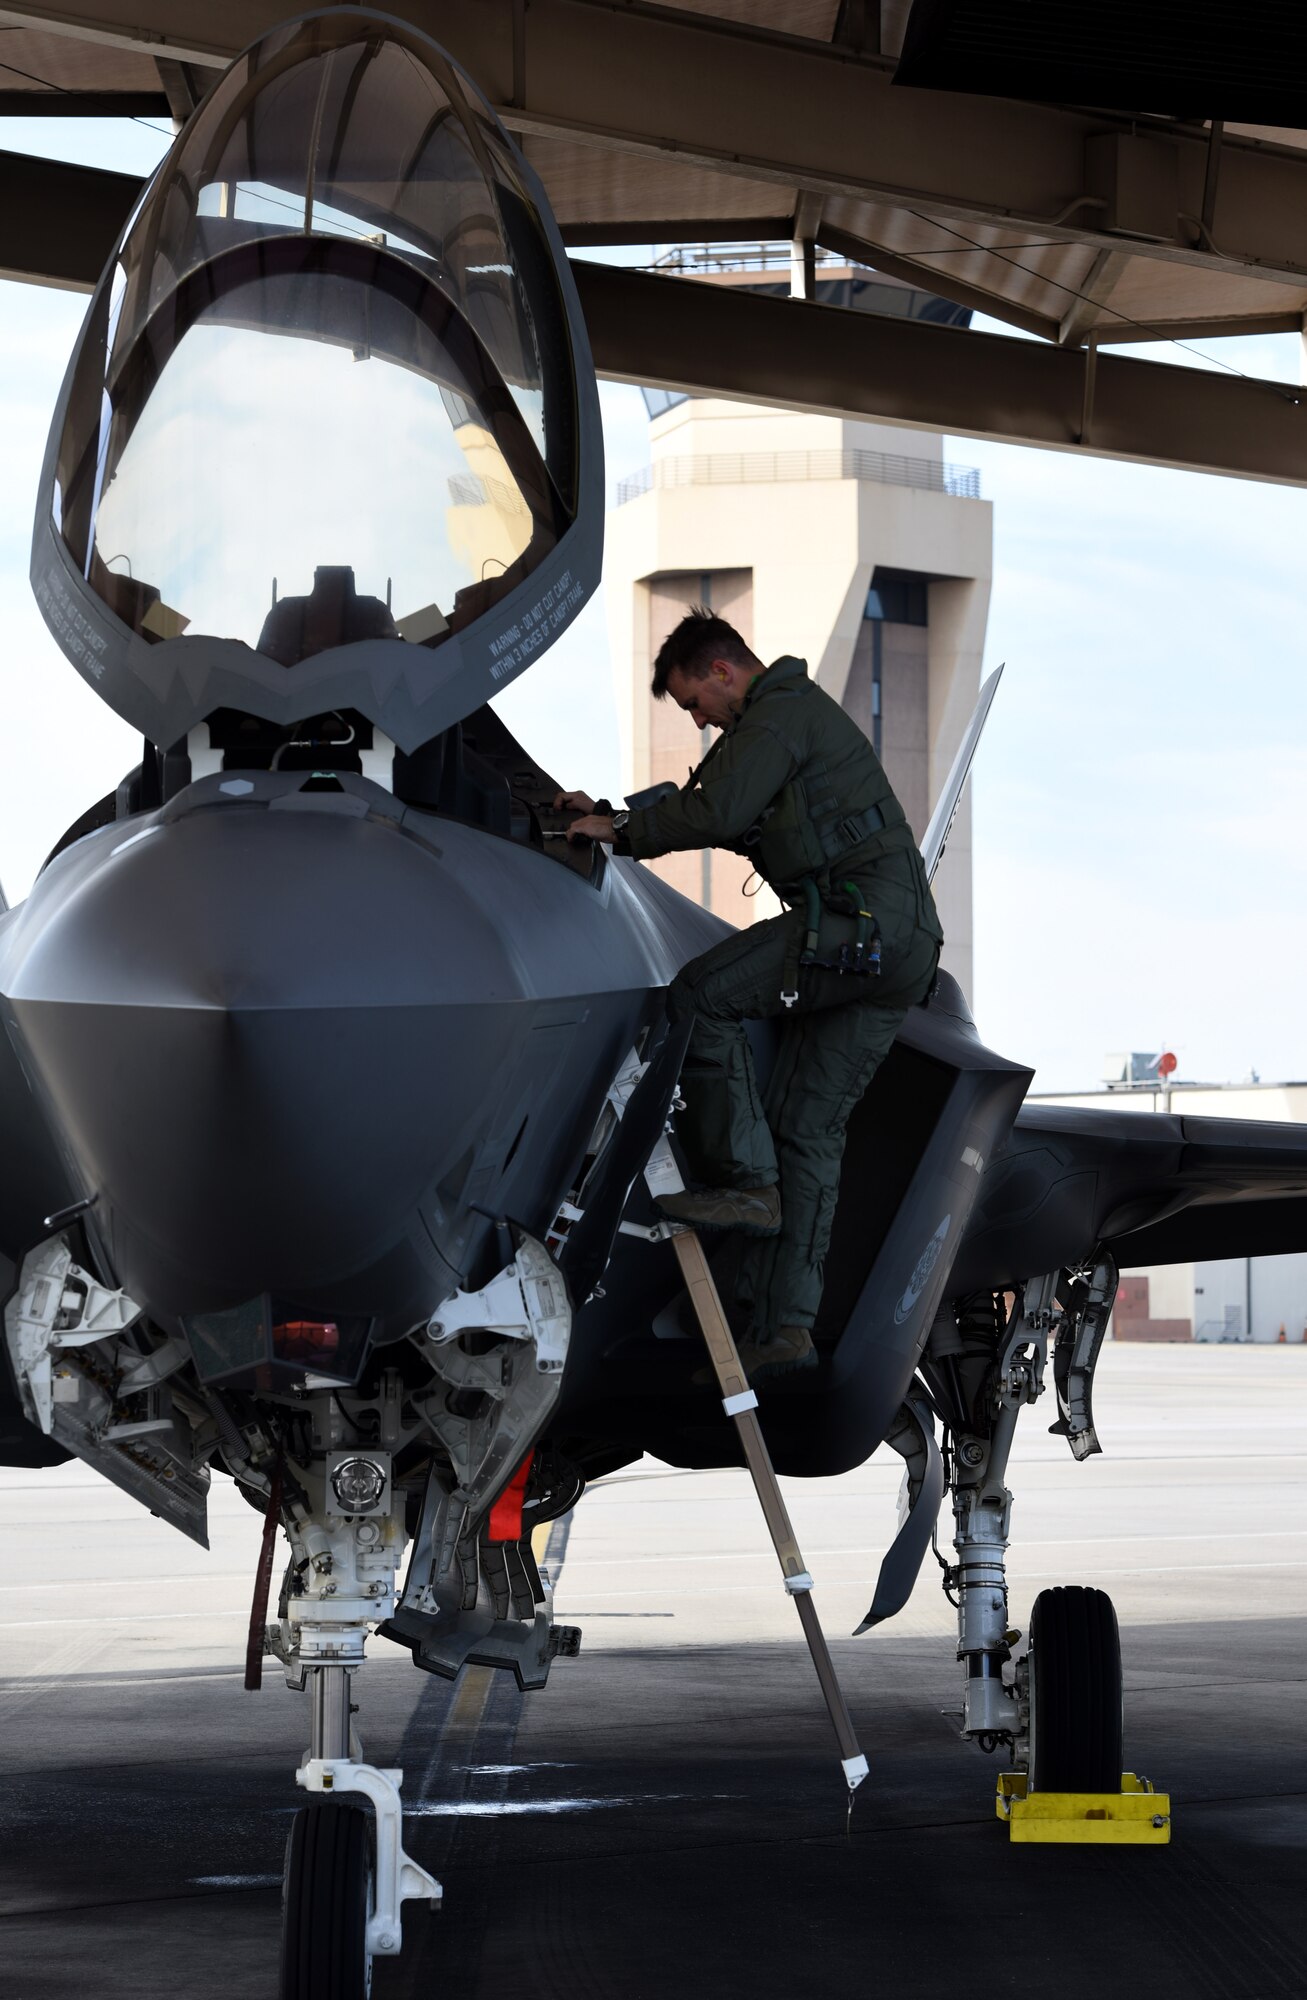 Maj. Brad Zimmerman, 33d Operations Support Squadron assistant chief of weapons, exits the cockpit of an F-35A Lightning II after a combat training sortie in exercise Checkered Flag Dec. 8, 2016, at Tyndall Air Force Base, Florida. The 33d Fighter Wing deployed six F-35A Lightning II and 95 personnel to Checkered Flag 17-1. Checkered Flag is a combat rehearsal where 15 aircraft platforms take to the skies to fly realistic and large-scale operations to prepare for contingency operations.  Specifically, this exercise tested the range of capabilities for the F-35A and the 33 FW student and instructor pilots, maintainers, air battle managers and intel by operating from two locations. (U.S. Air Force photo by Staff Sgt. Peter Thompson)